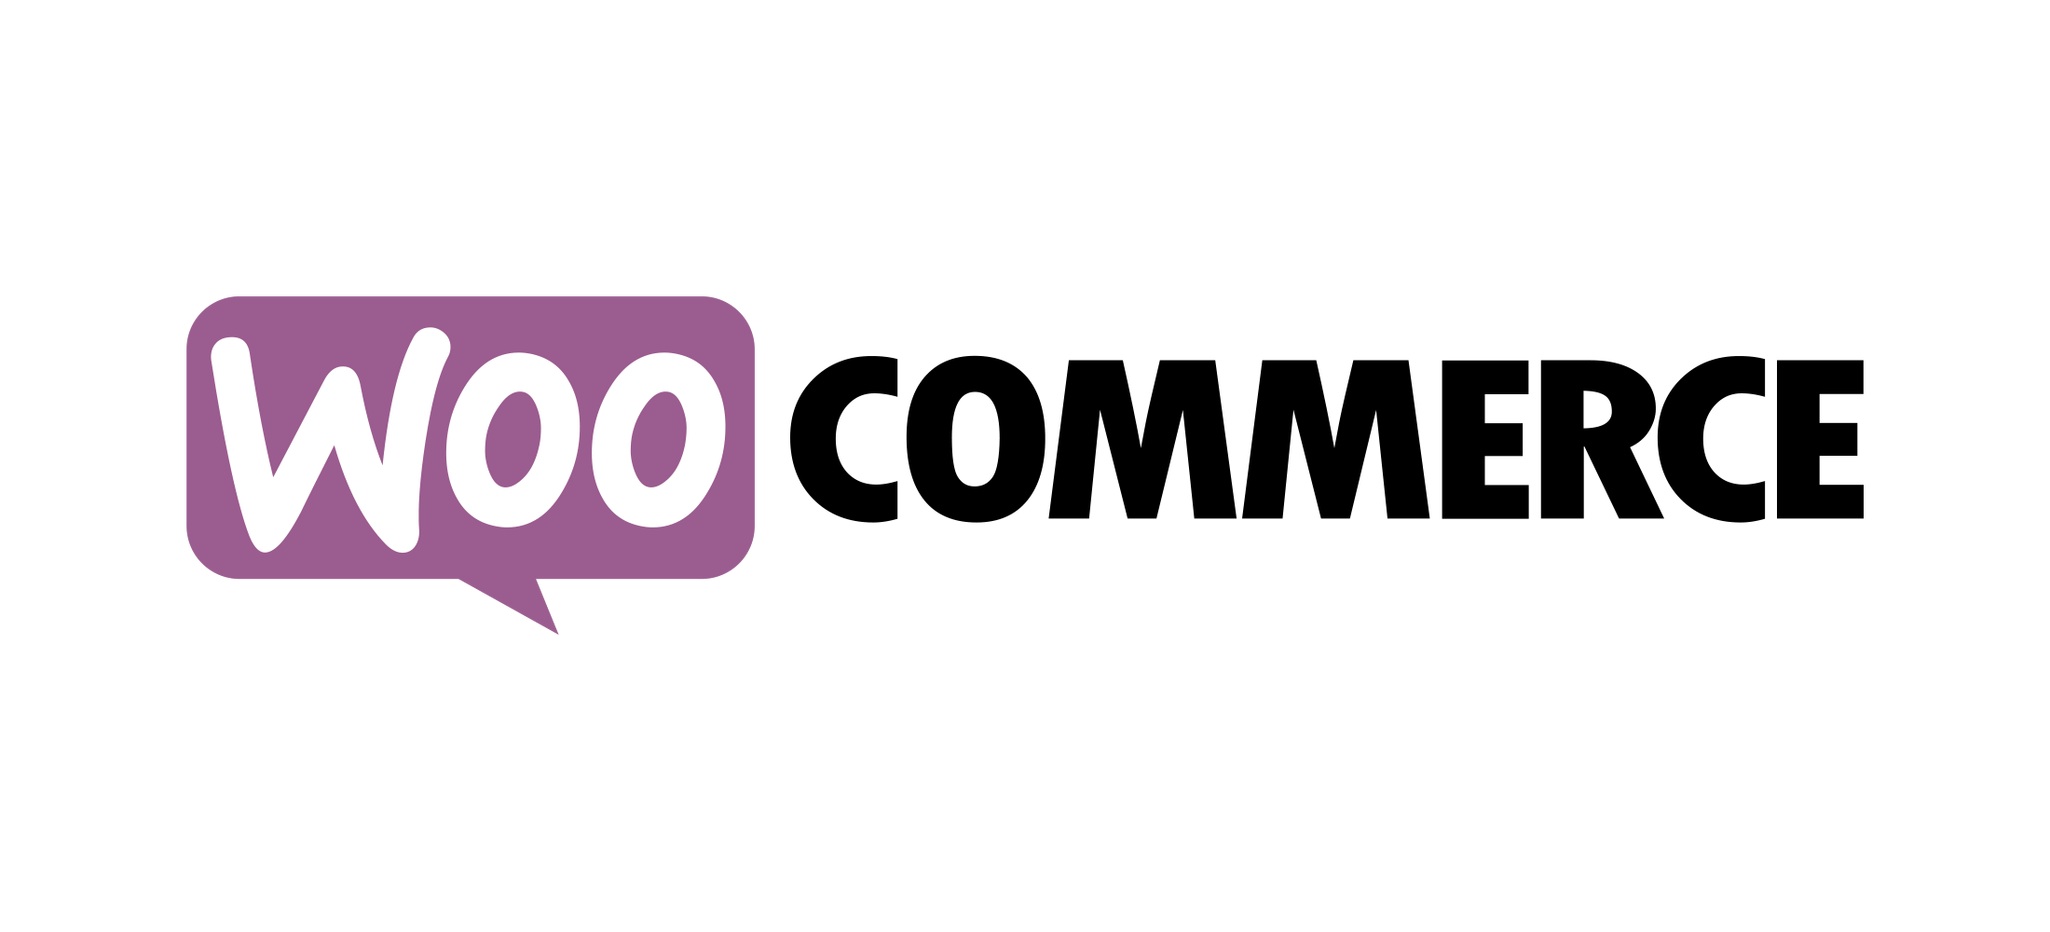 WooCommerce Powers 42% of All Online Stores